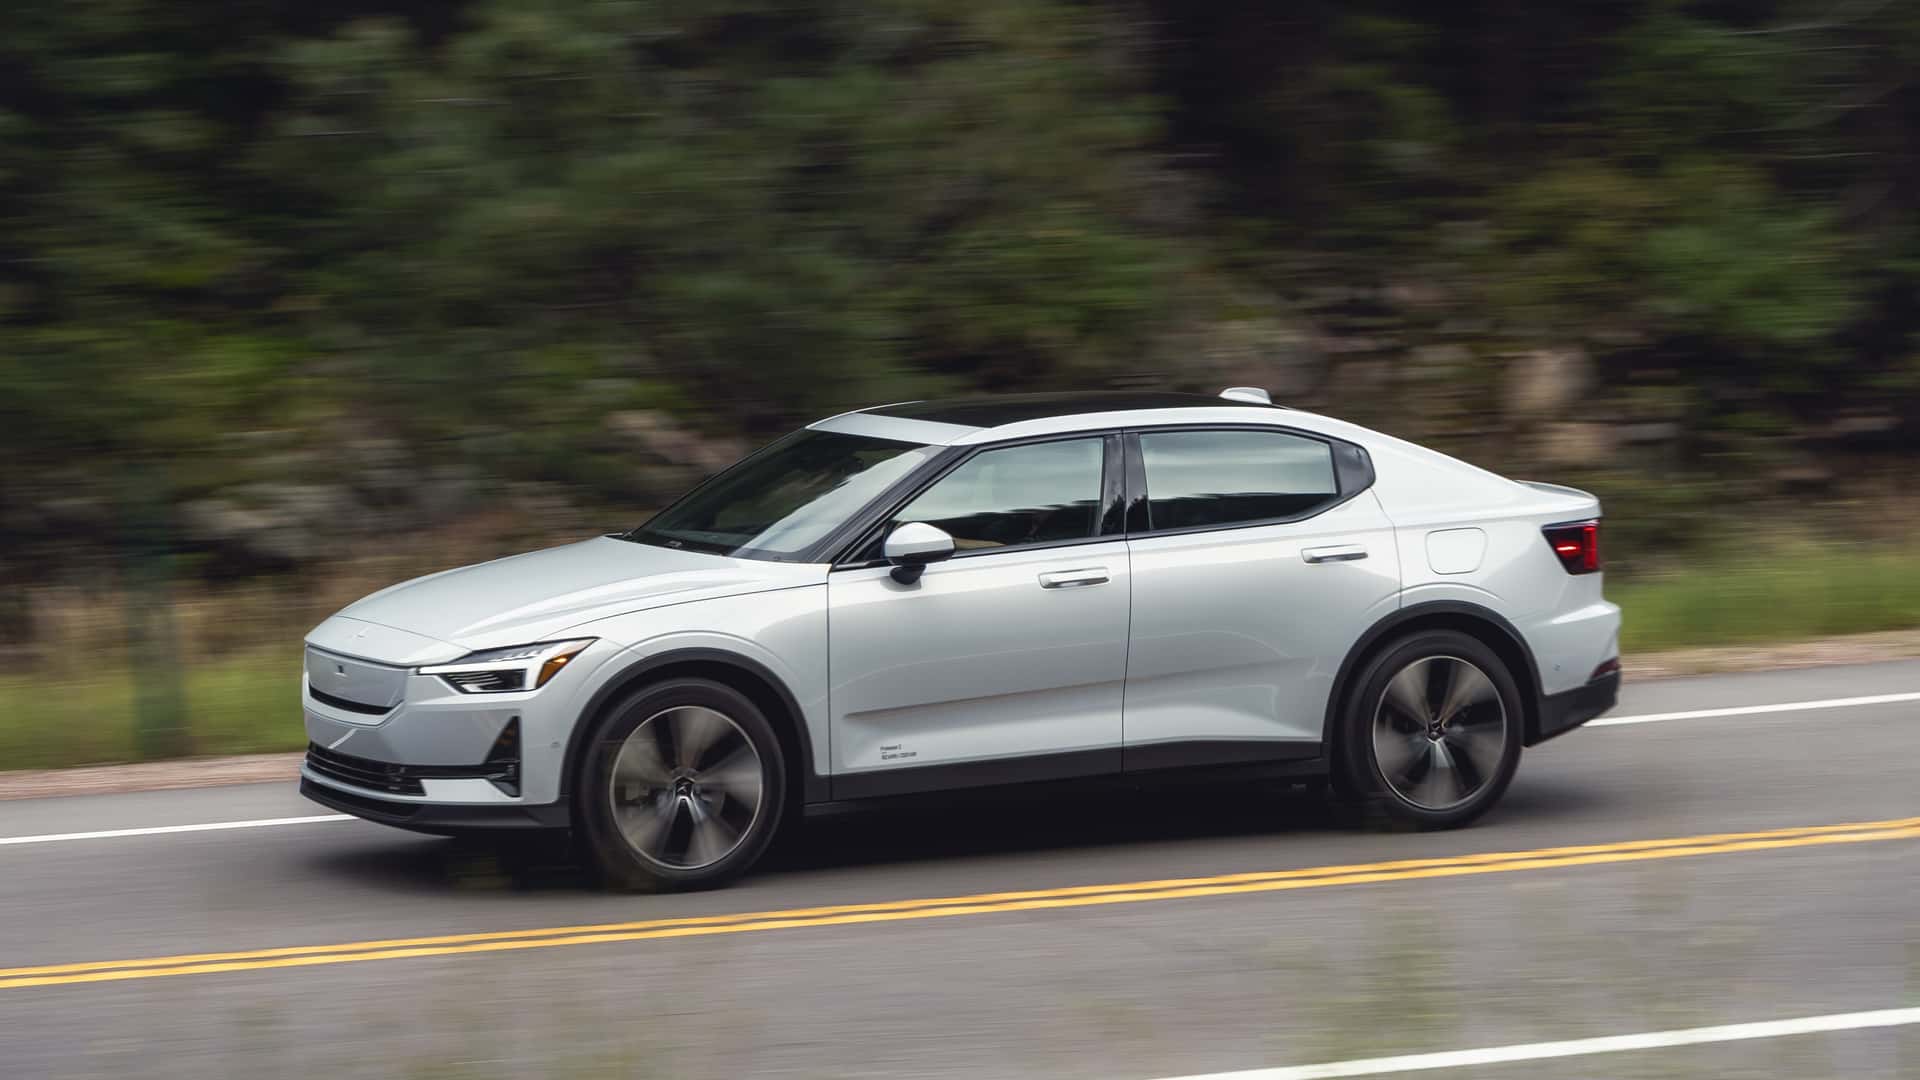 polestar introduces prime video to in-car infotainment system